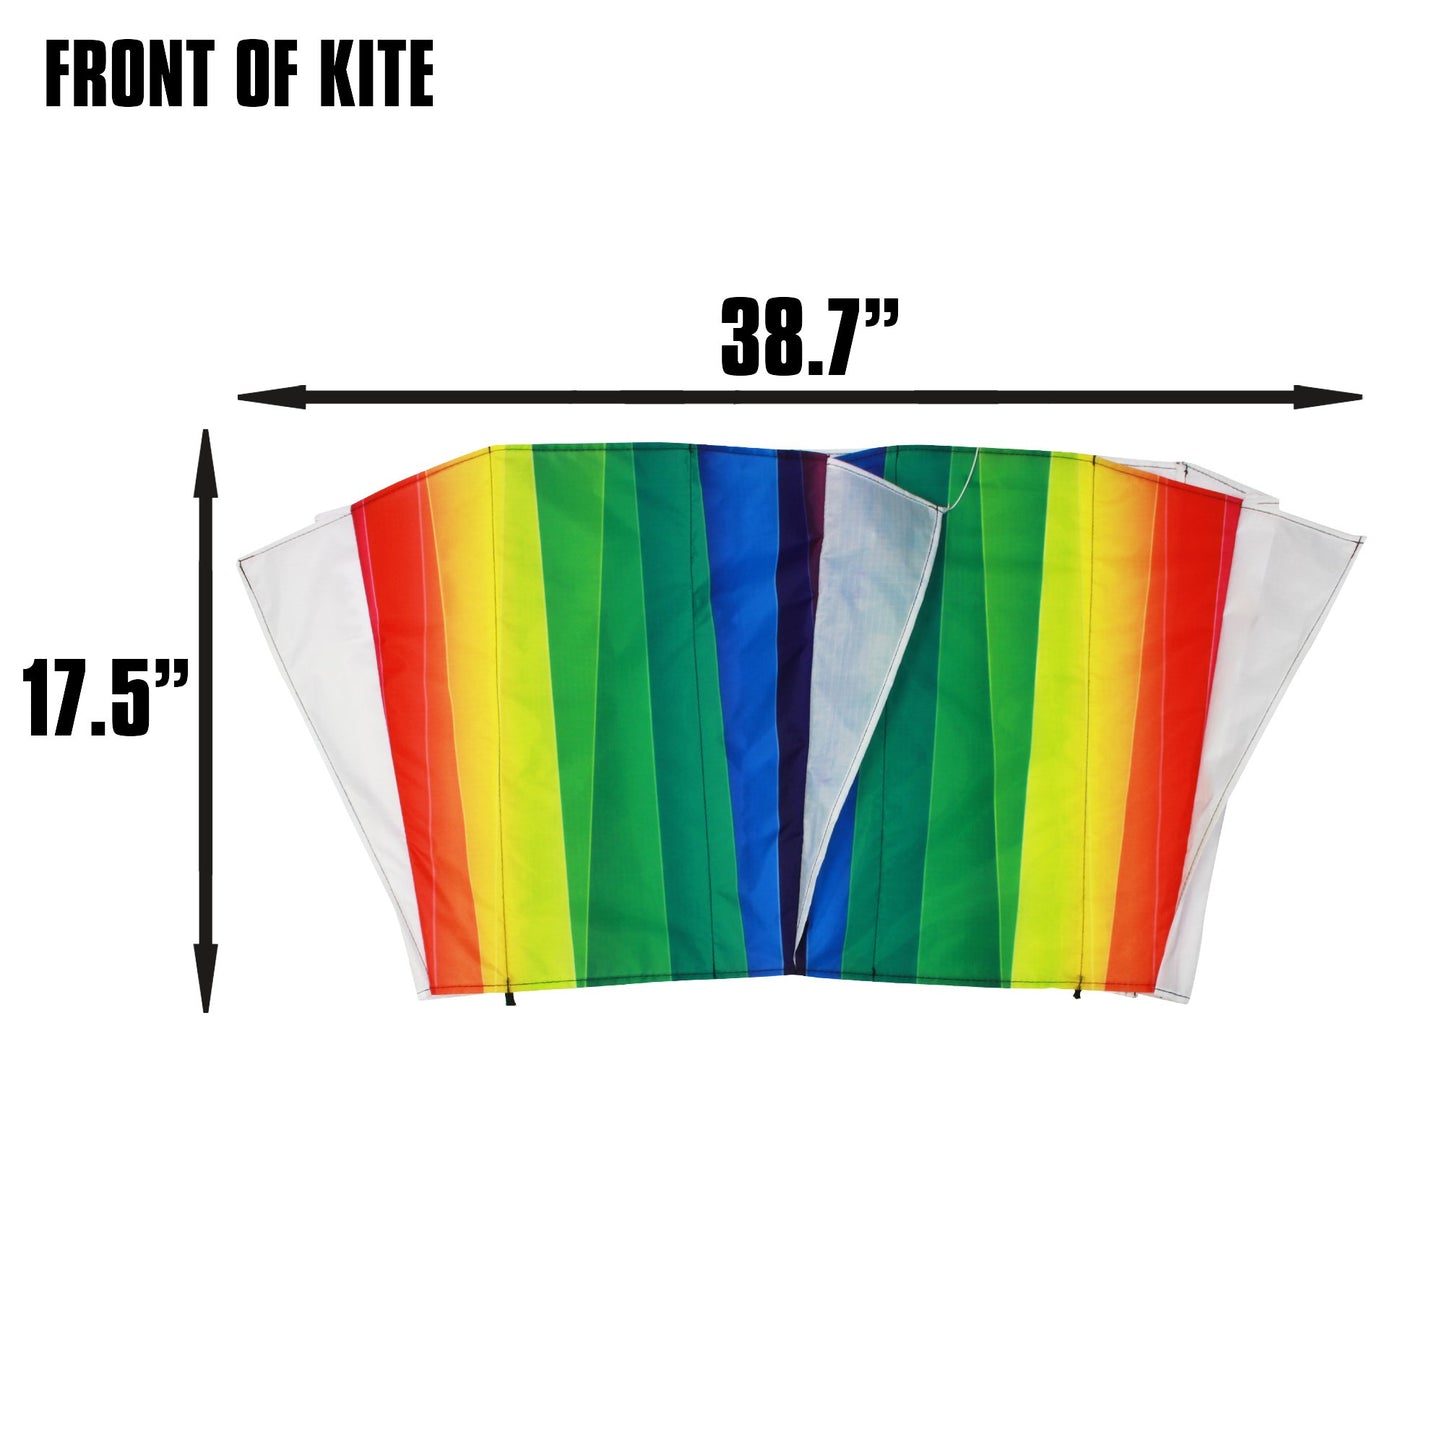 X Kites SkyFoil Rainbow + Pocket Kite Abstract Parafoil Kite Bundle - No Assembly Required dimensions